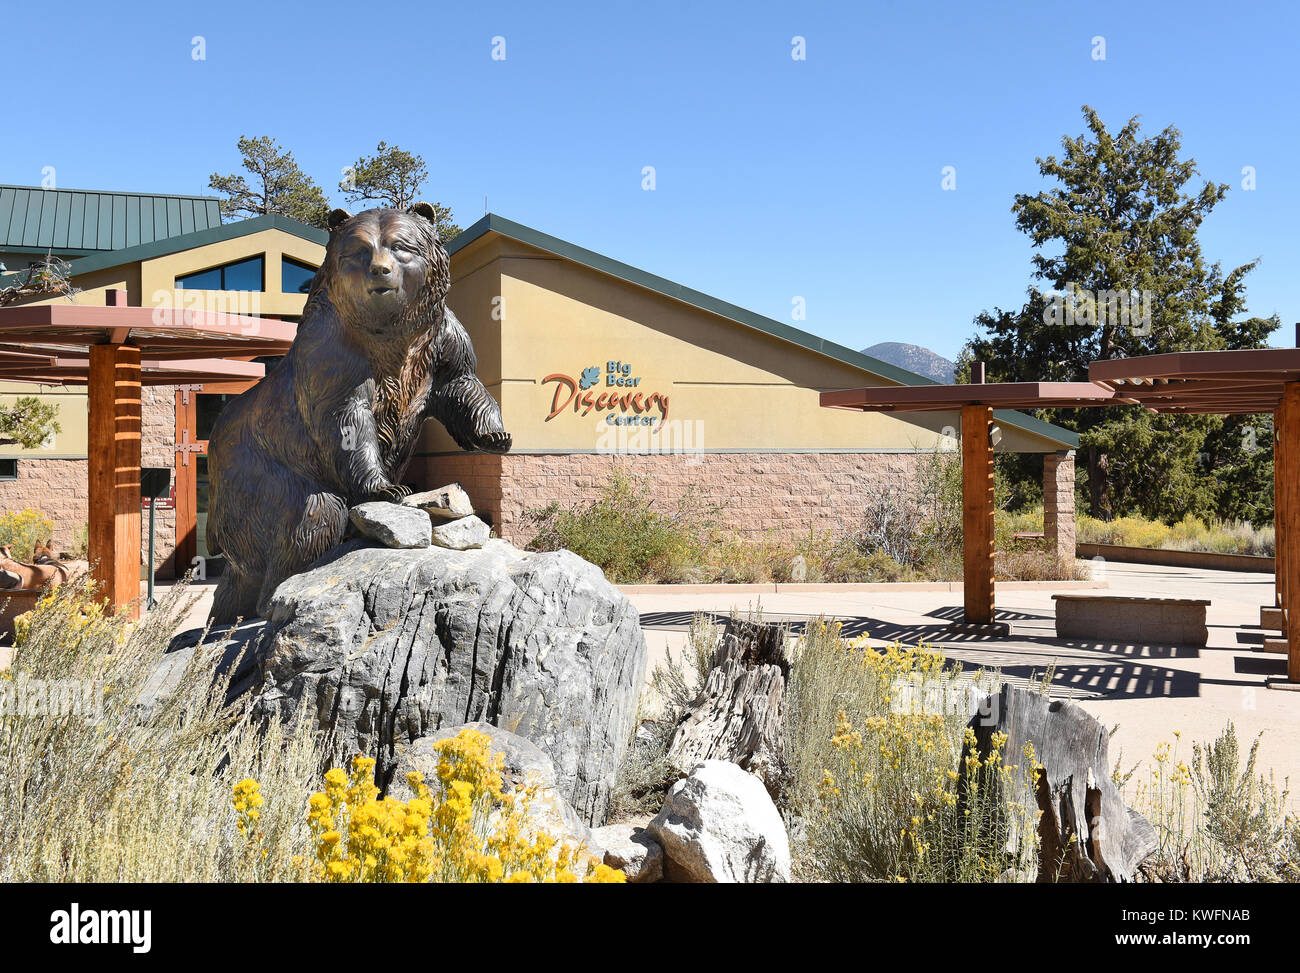 FAWNSKIN, CALIFORNIA - SEPTEMBER 25, 2016: Big Bear Discovery Center. The Discovery Center is an educational center in the San Bernardino National For Stock Photo